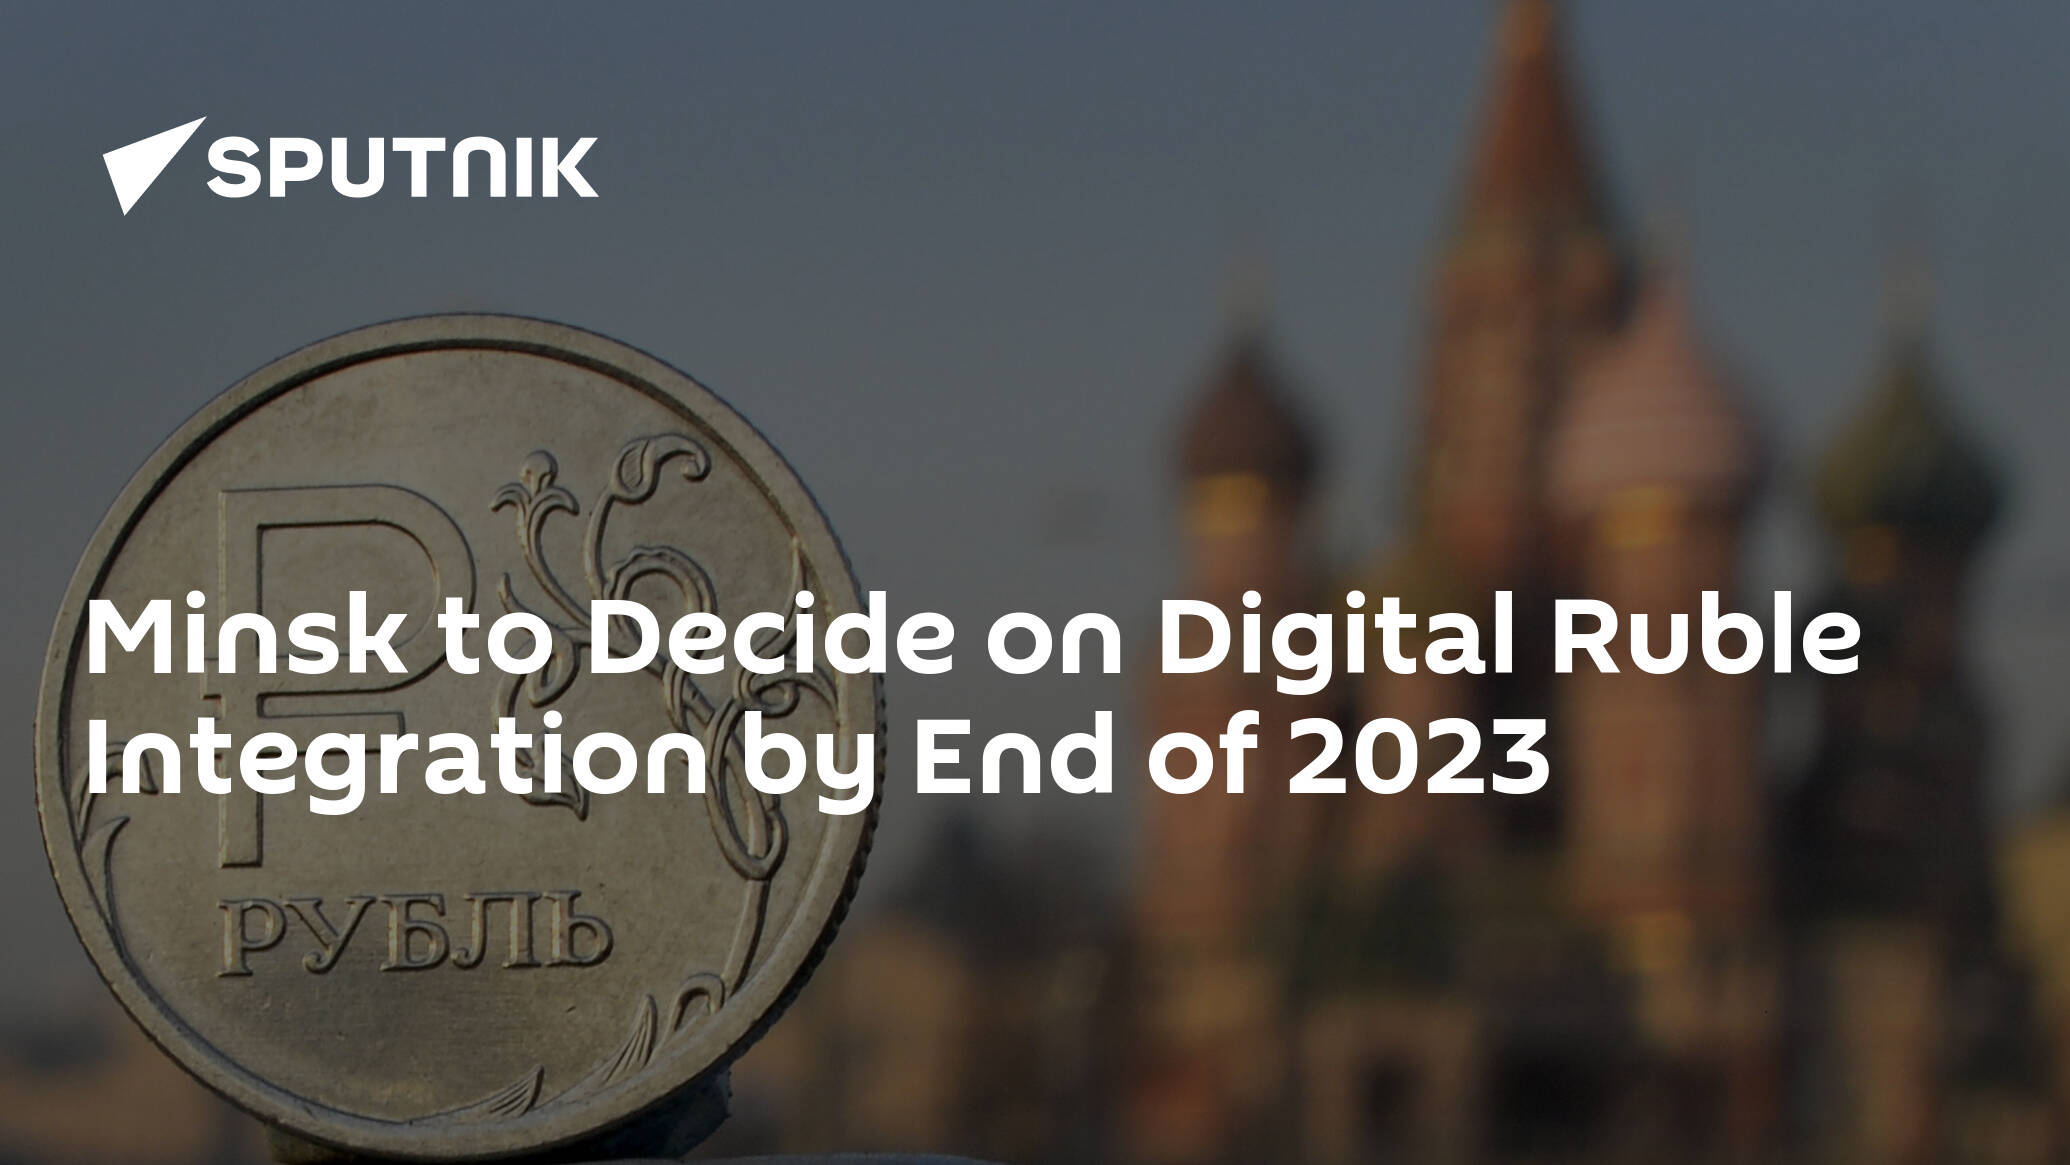 Minsk to Decide on Digital Ruble Integration by End of 2023